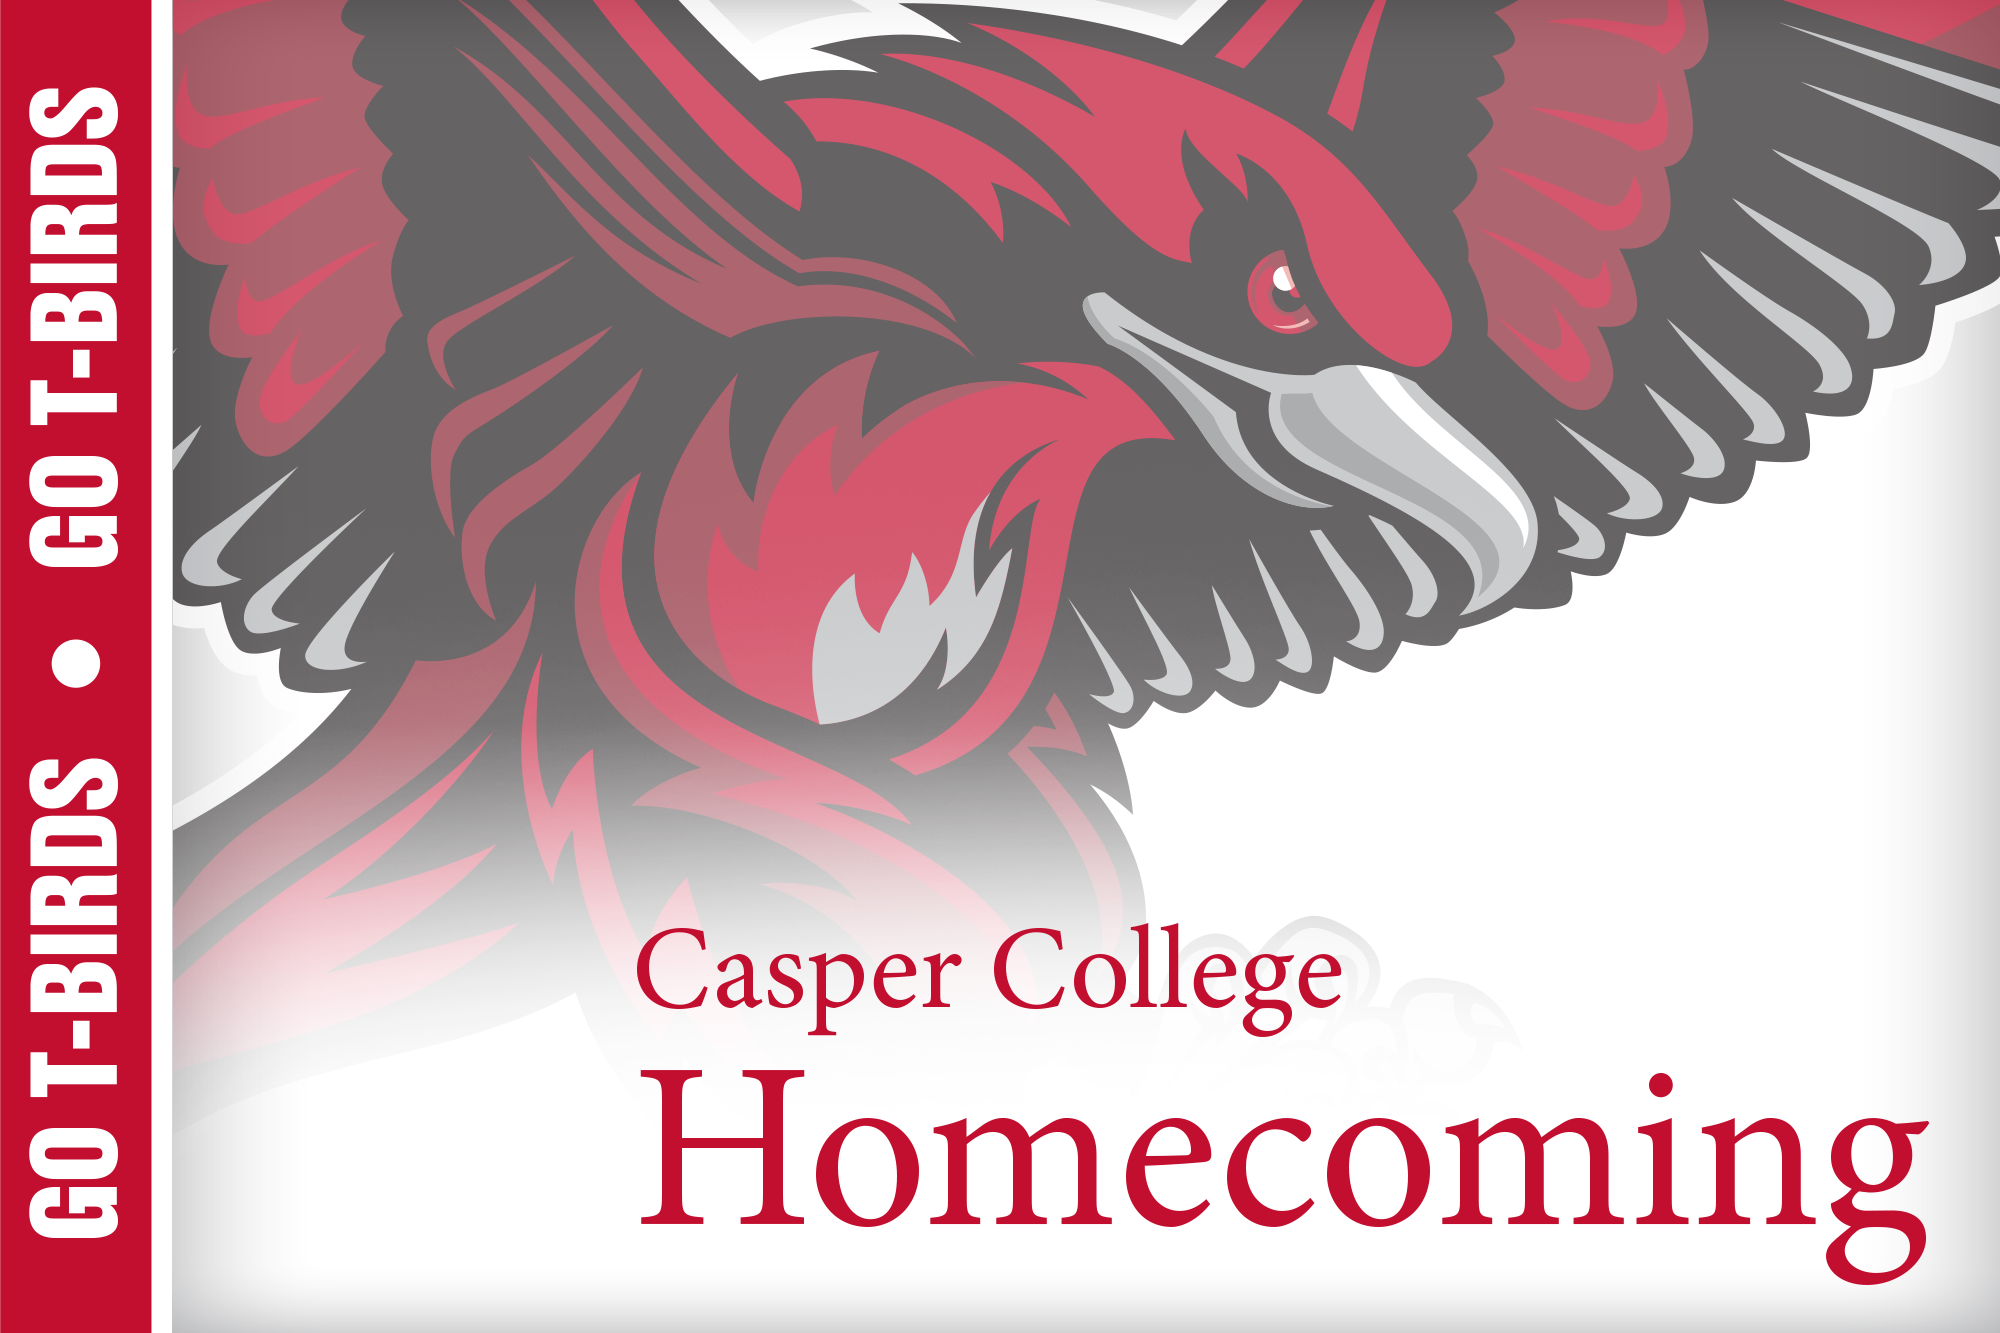 Image of the athletic Thunderbird with the words "Casper College Homecoming."